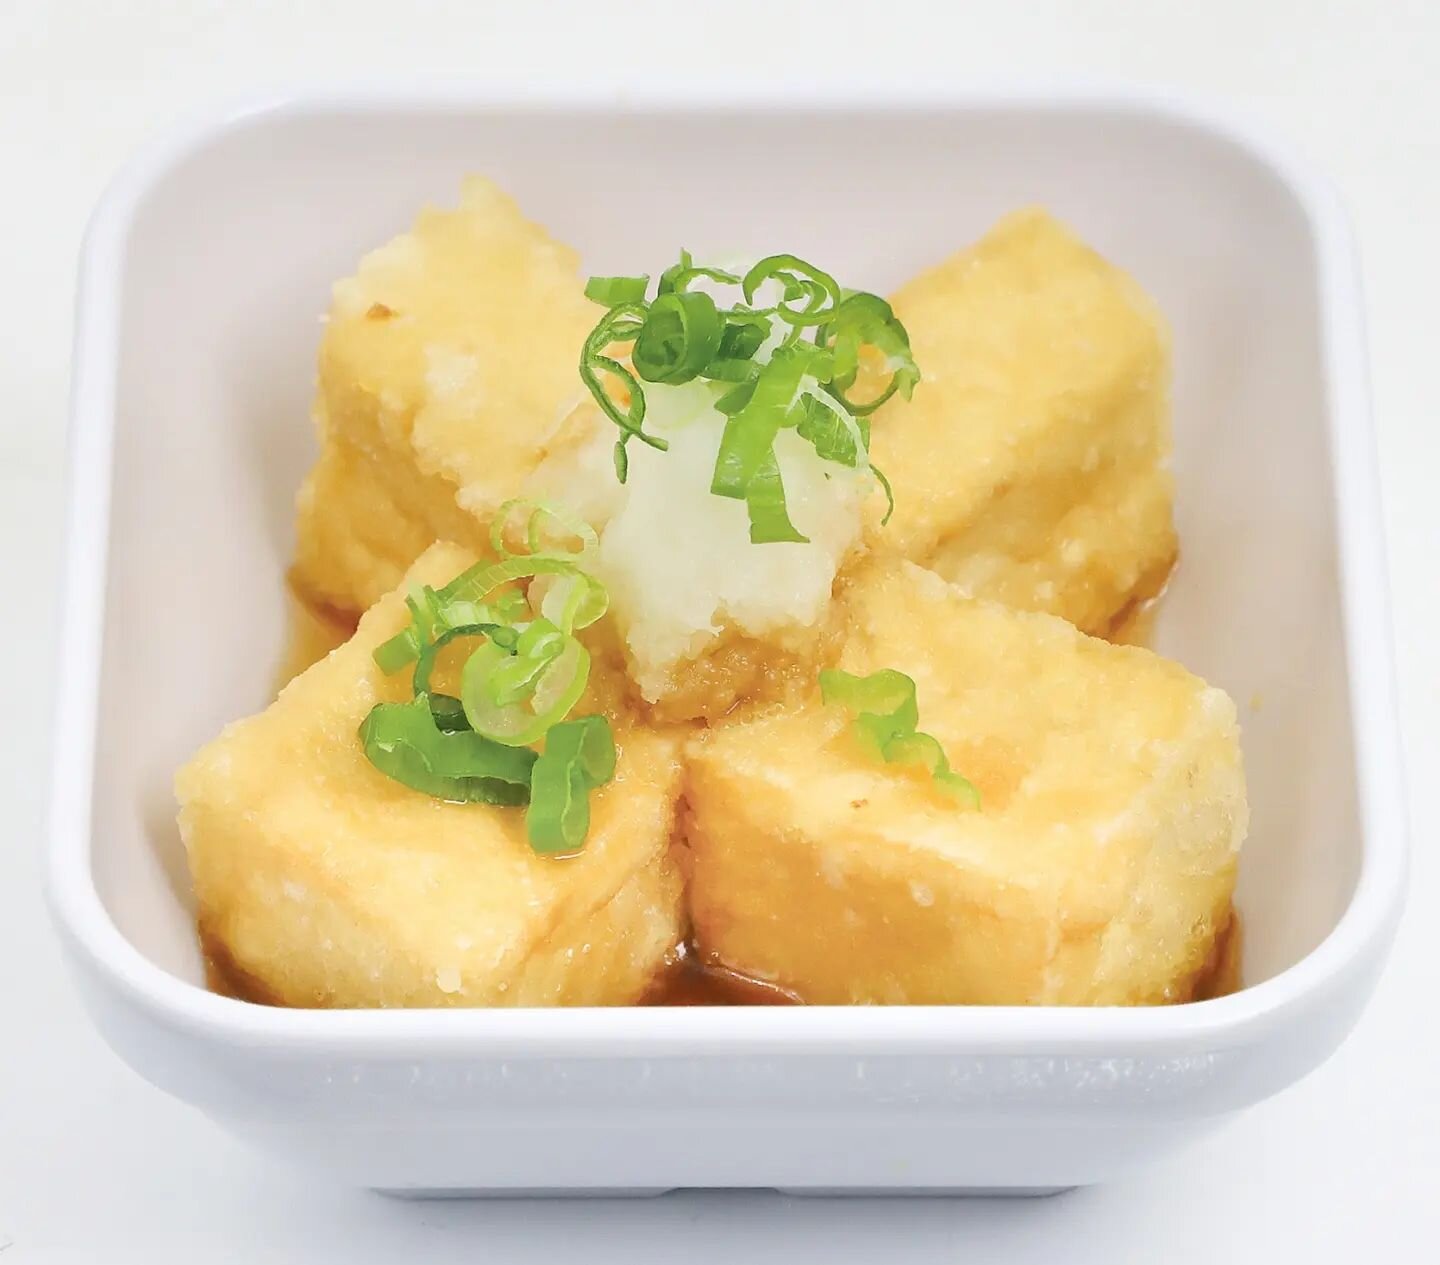 A new item ✨️ in our menu is the Age Dashi Tofu appetizer. It's deep fried tofu fried until golden brown and then served with special sauce. A must try! 👌 #oomasa #japanesefood